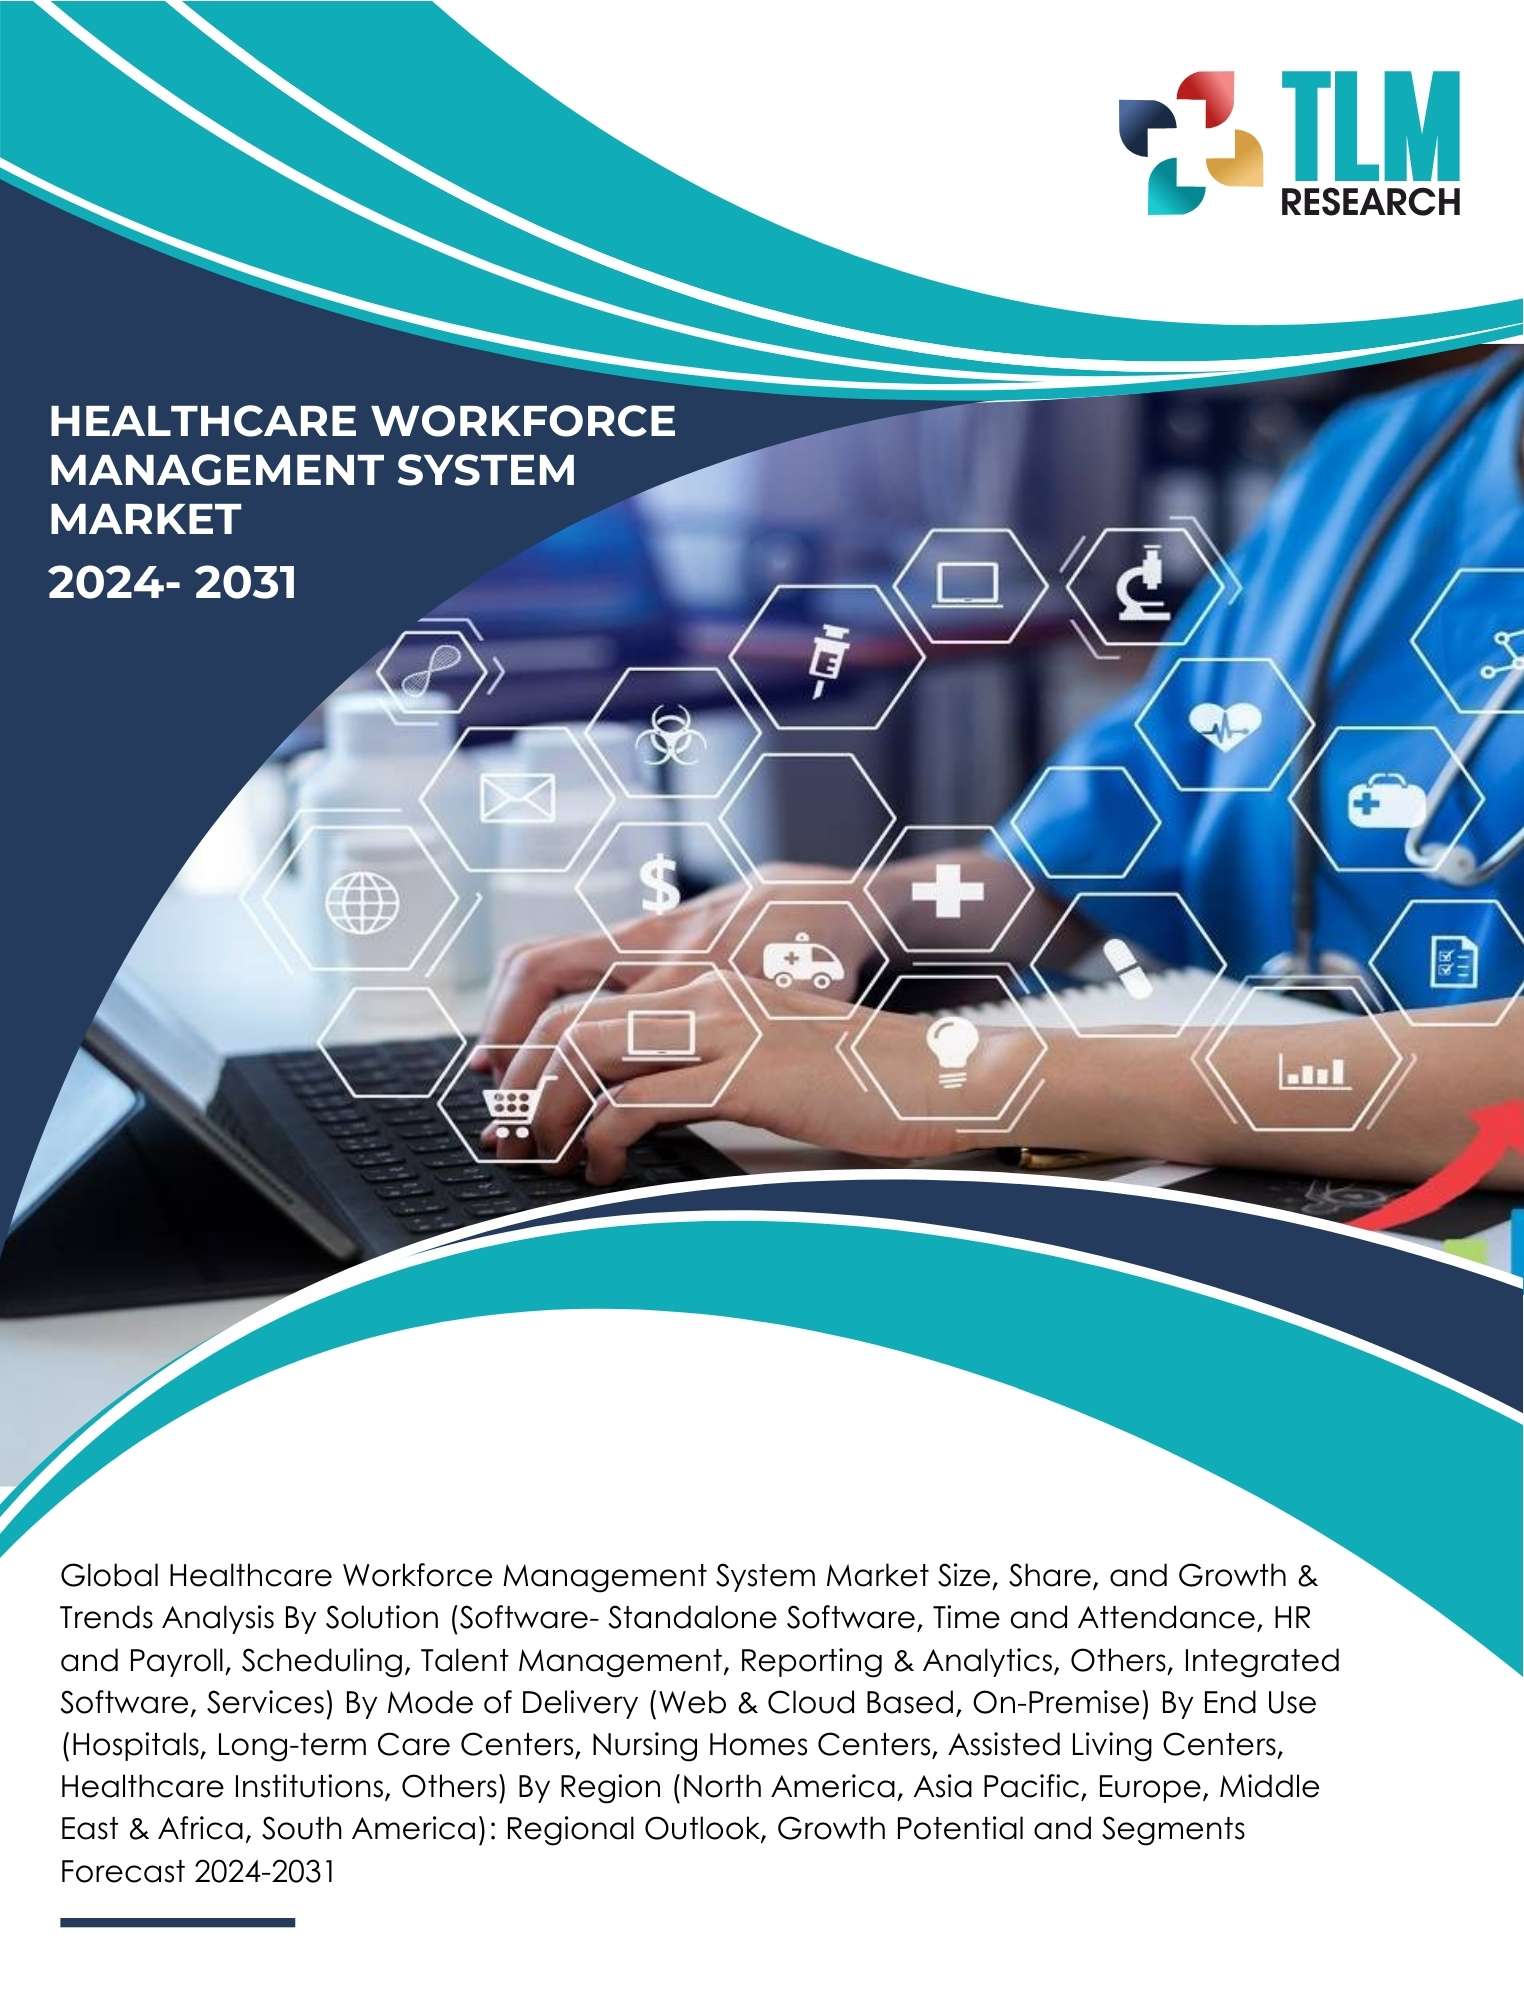 Healthcare Workforce Management System Market Size and Share | Forecast to 2031 | TLM Research